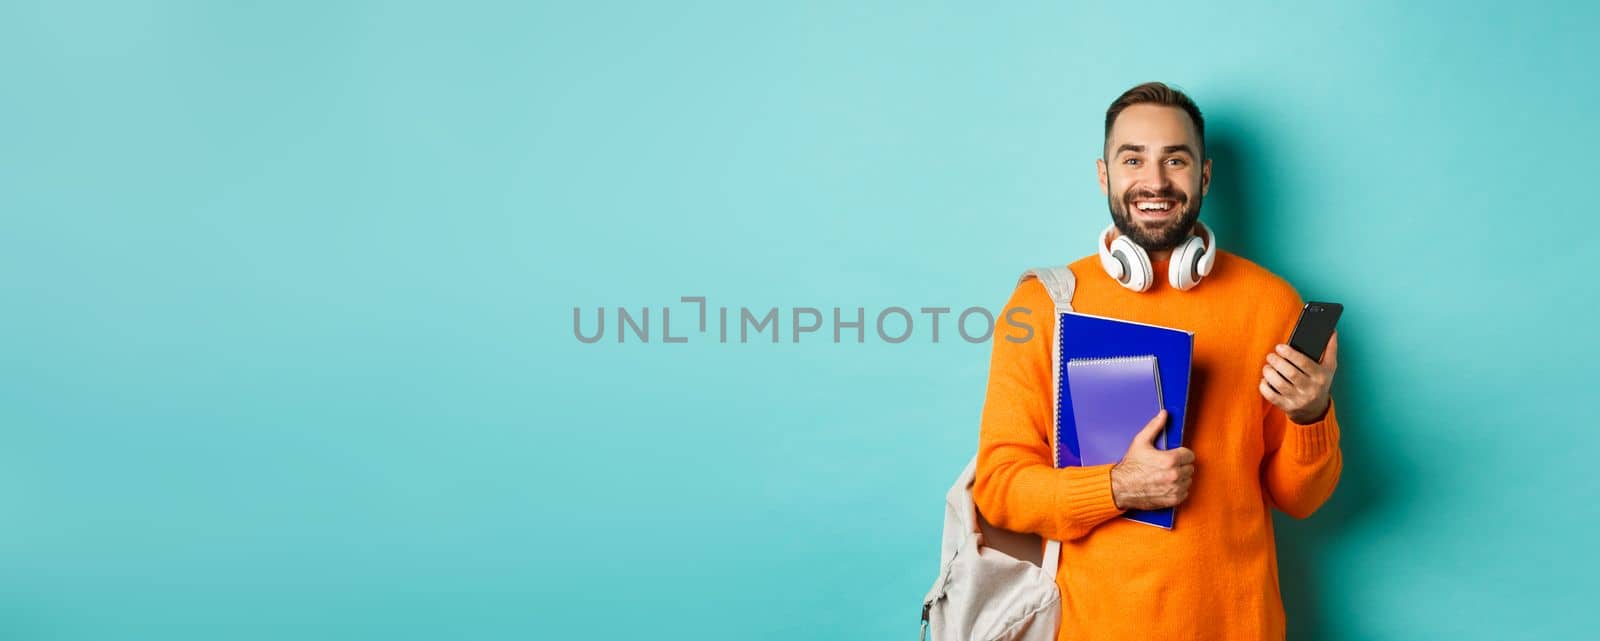 Education. Handsome male student with headphones and backpack, using smartphone and holding notebooks, smiling happy, standing over turquoise background.